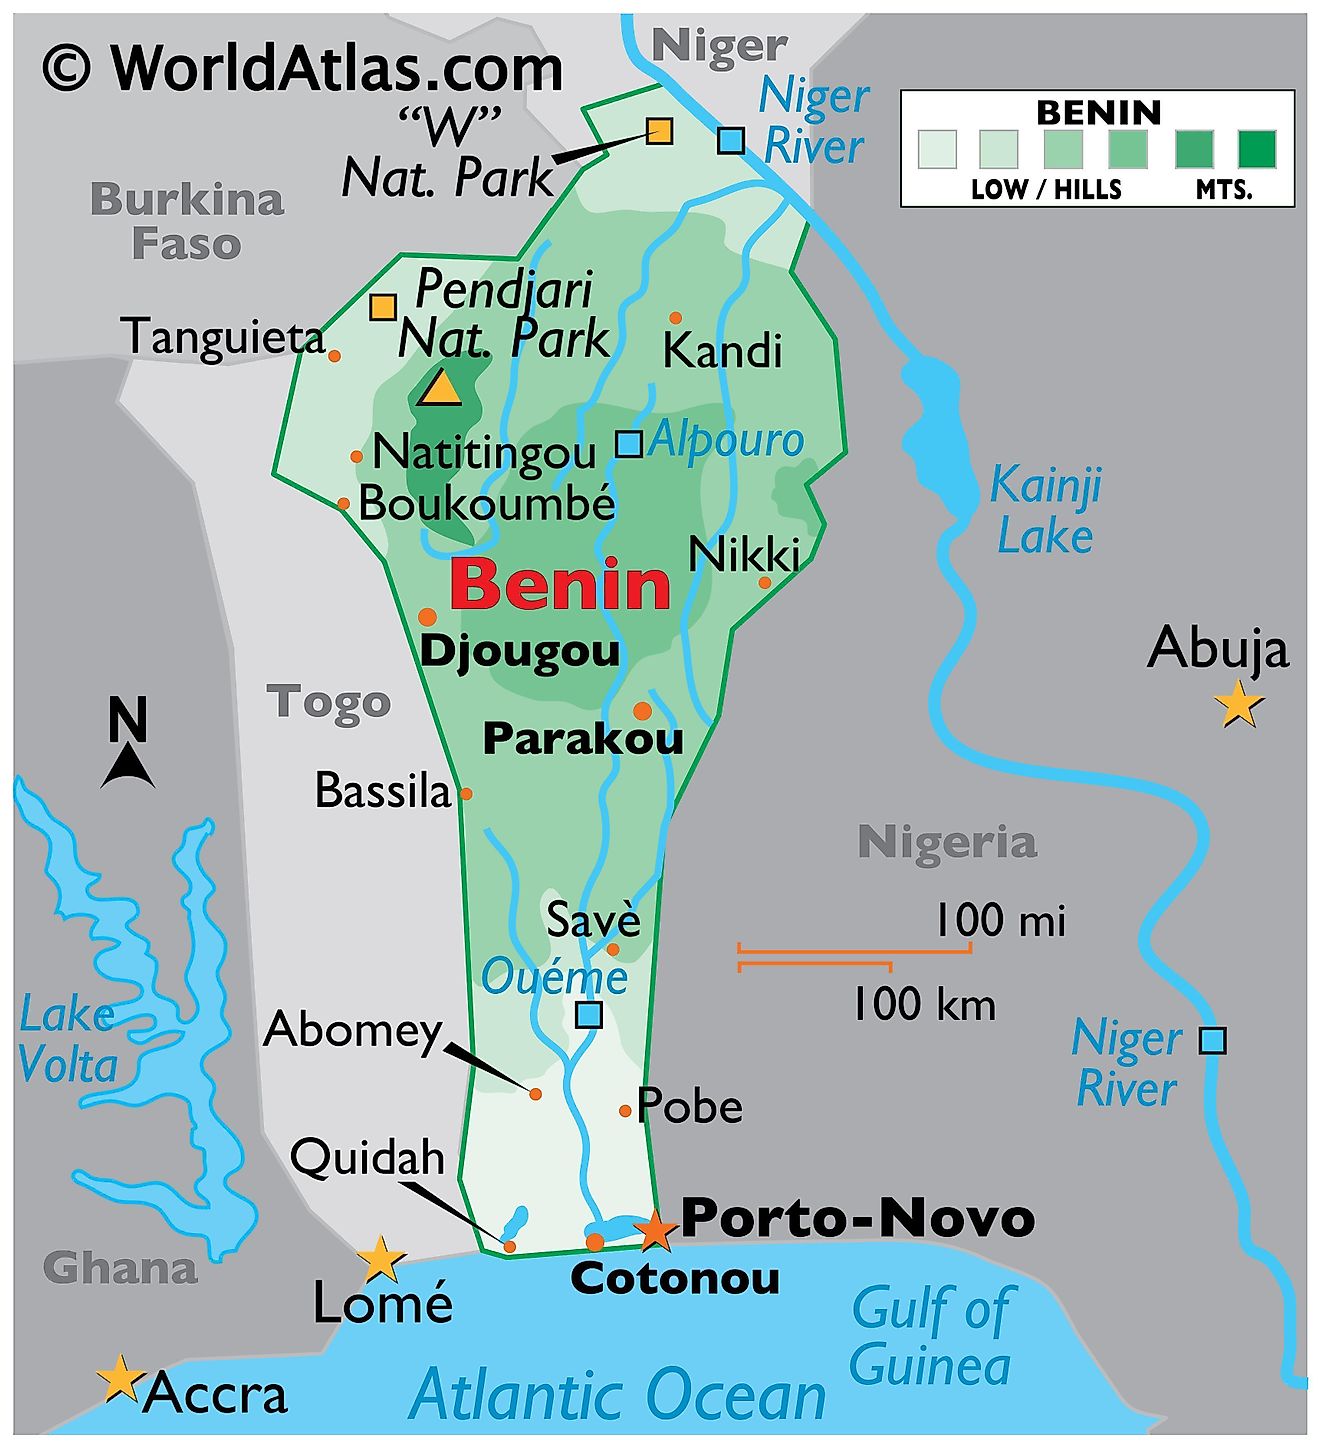 Physical Map of Benin with state boundaries. Details the physical features of the country, including relief, major rivers, cities, and various national parks.